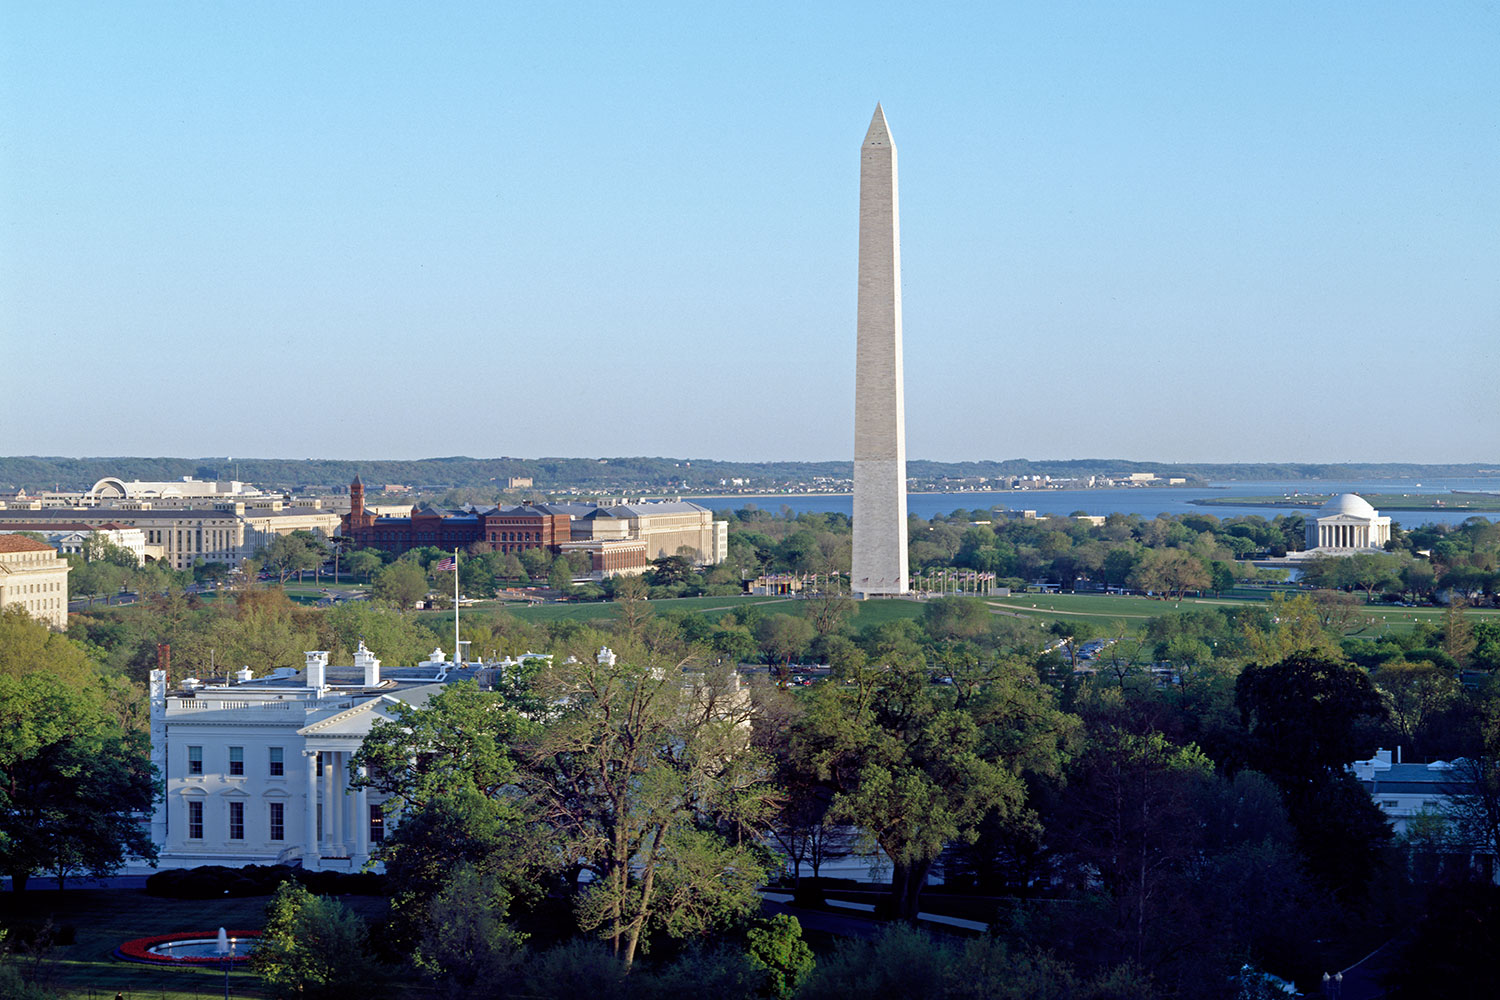 Five separate National Park Service units: the White House and President's Park; Washington Monument; National Mall; Jefferson Memorial; and East Potomac Park.